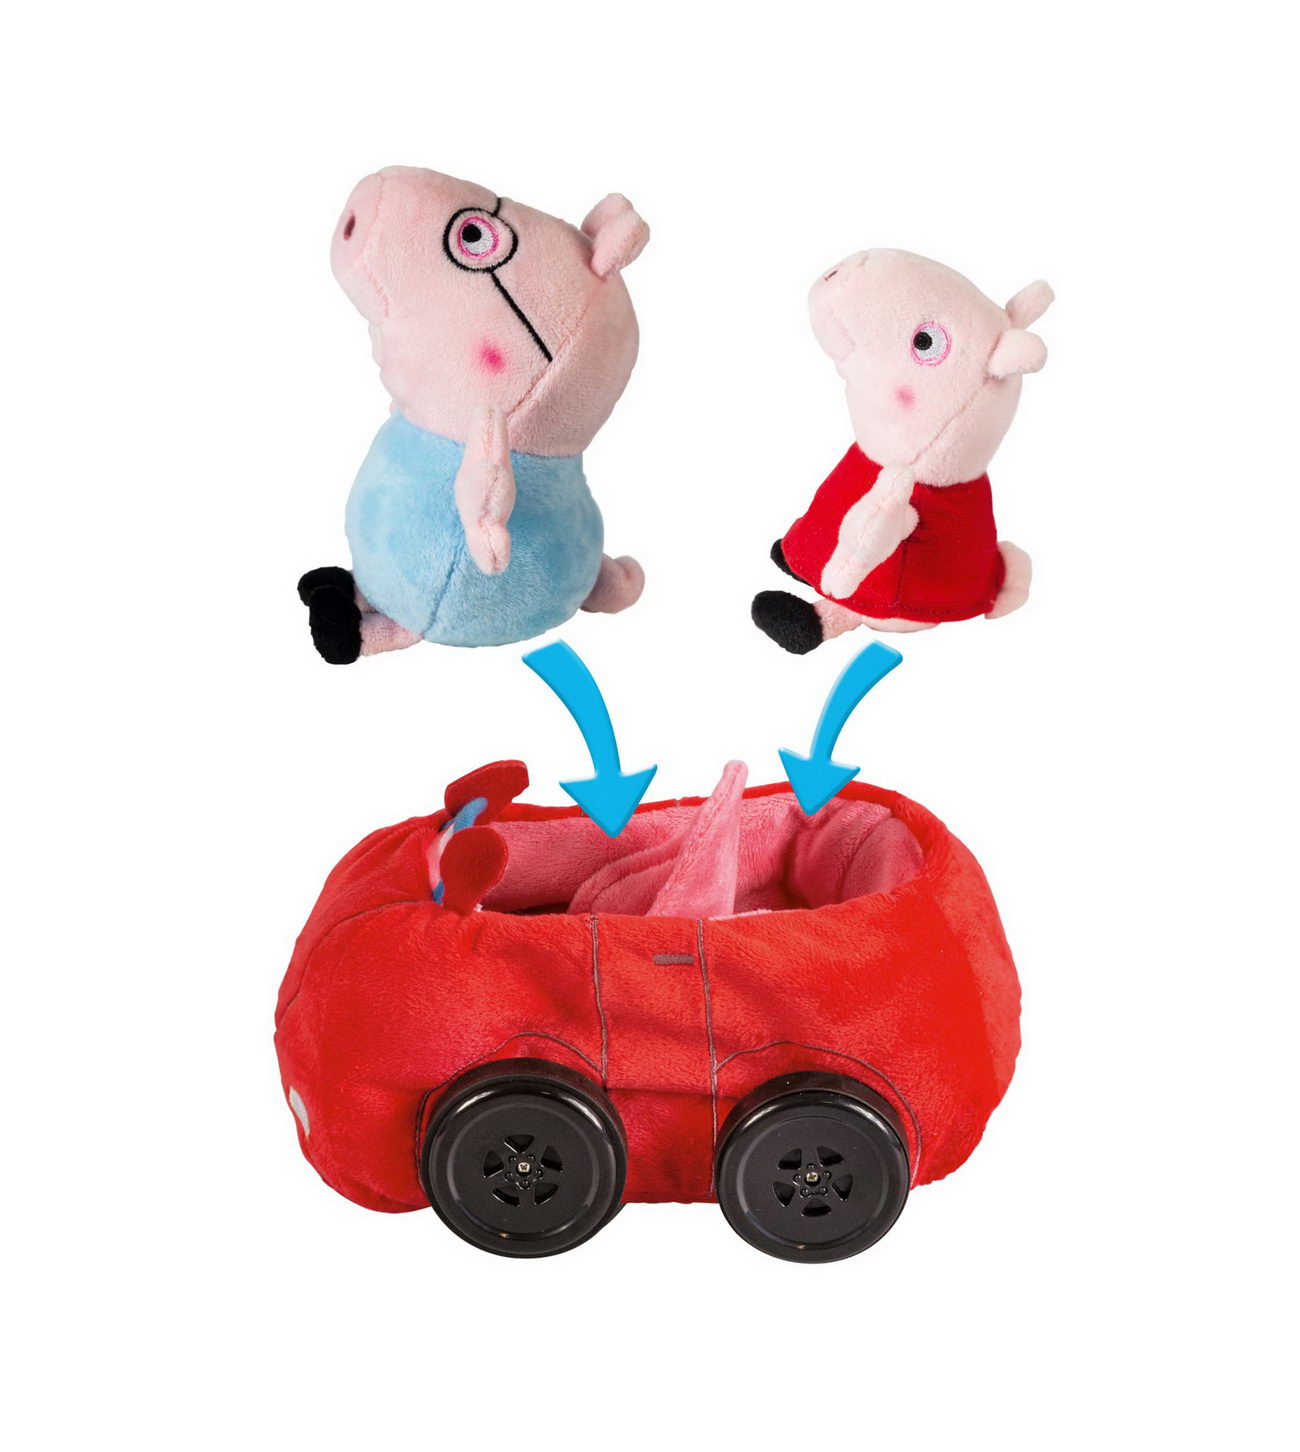 Revell 23203 - My First RC Car - PEPPA PIG